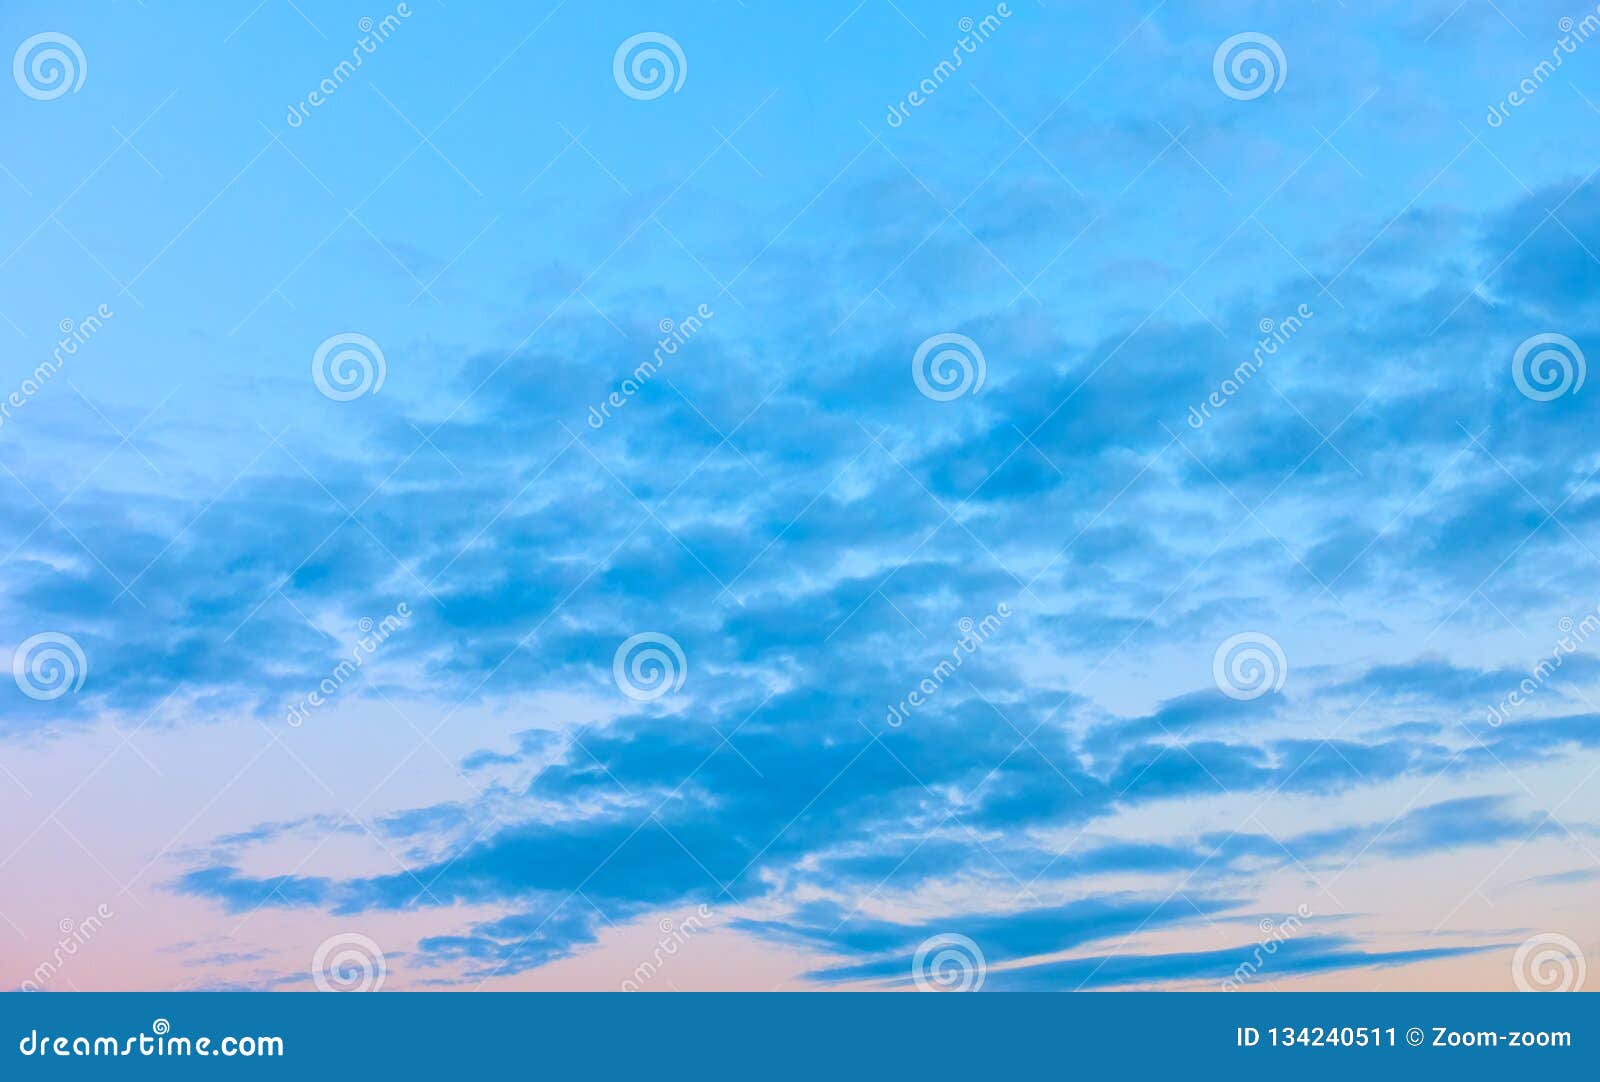 calm evening sky with clouds